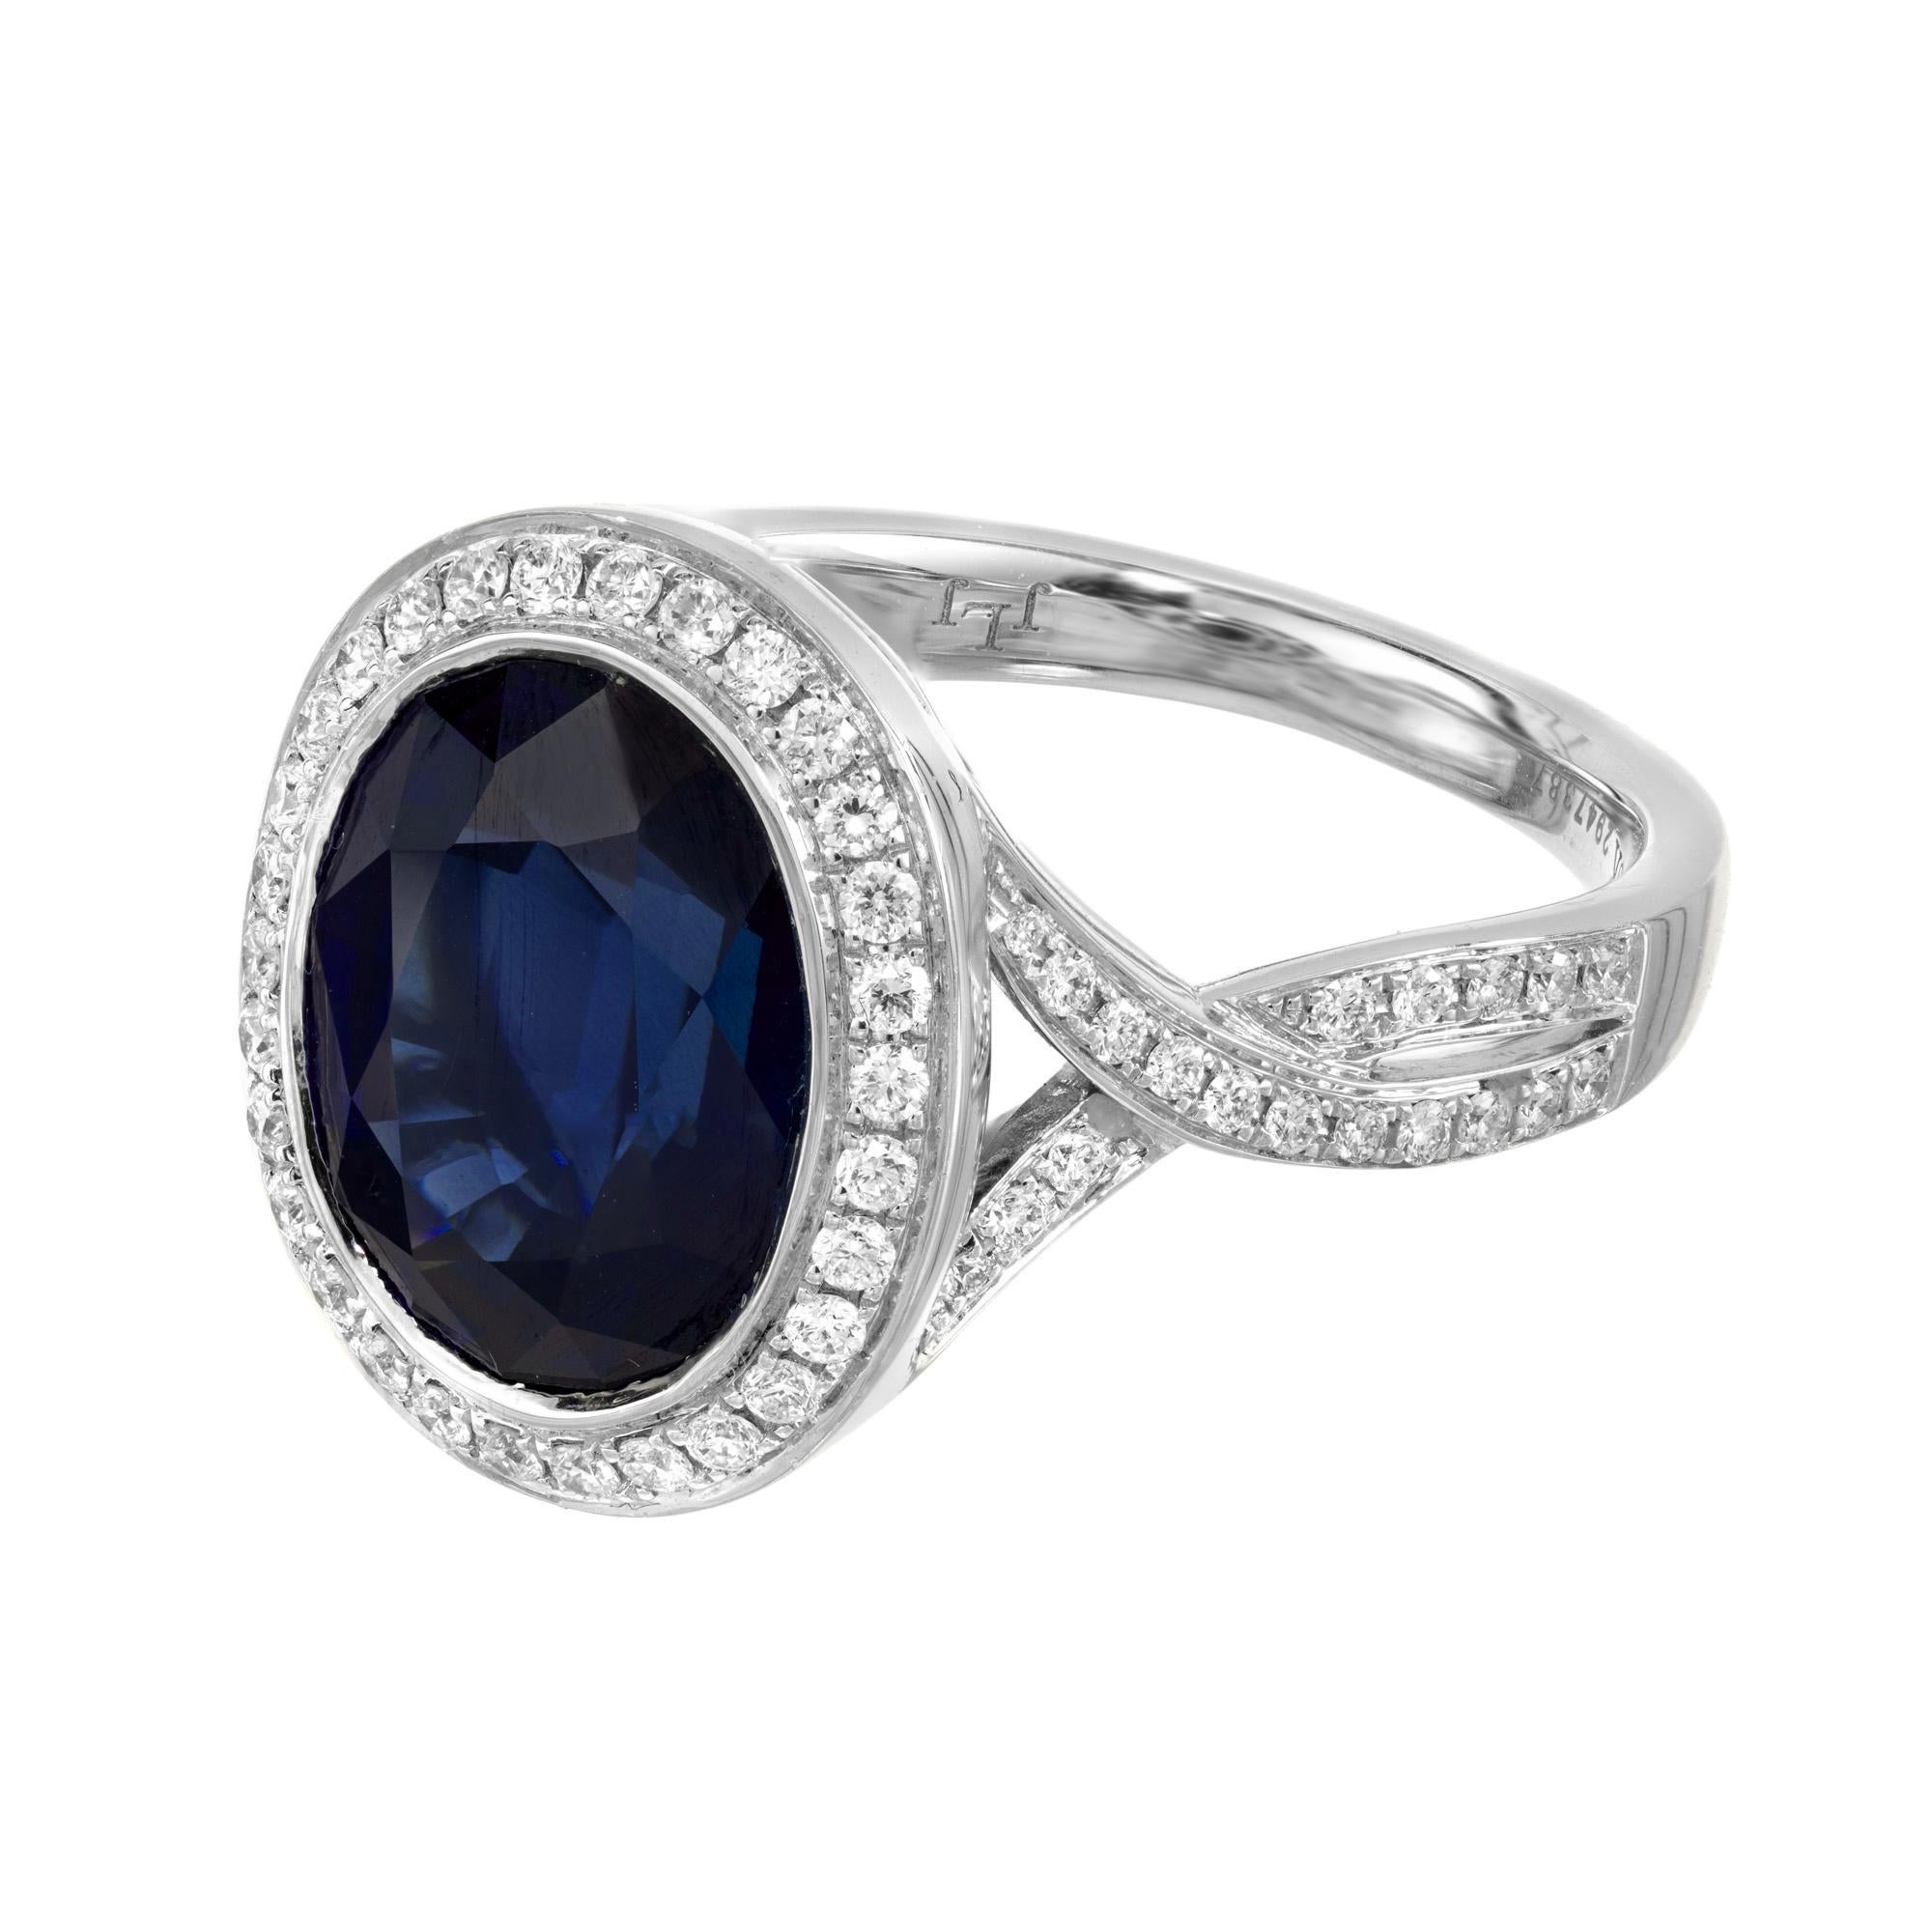 Oval Cut Peter Suchy GIA 6.50 Carat Oval Blue Sapphire Diamond Gold Engagement aRing For Sale